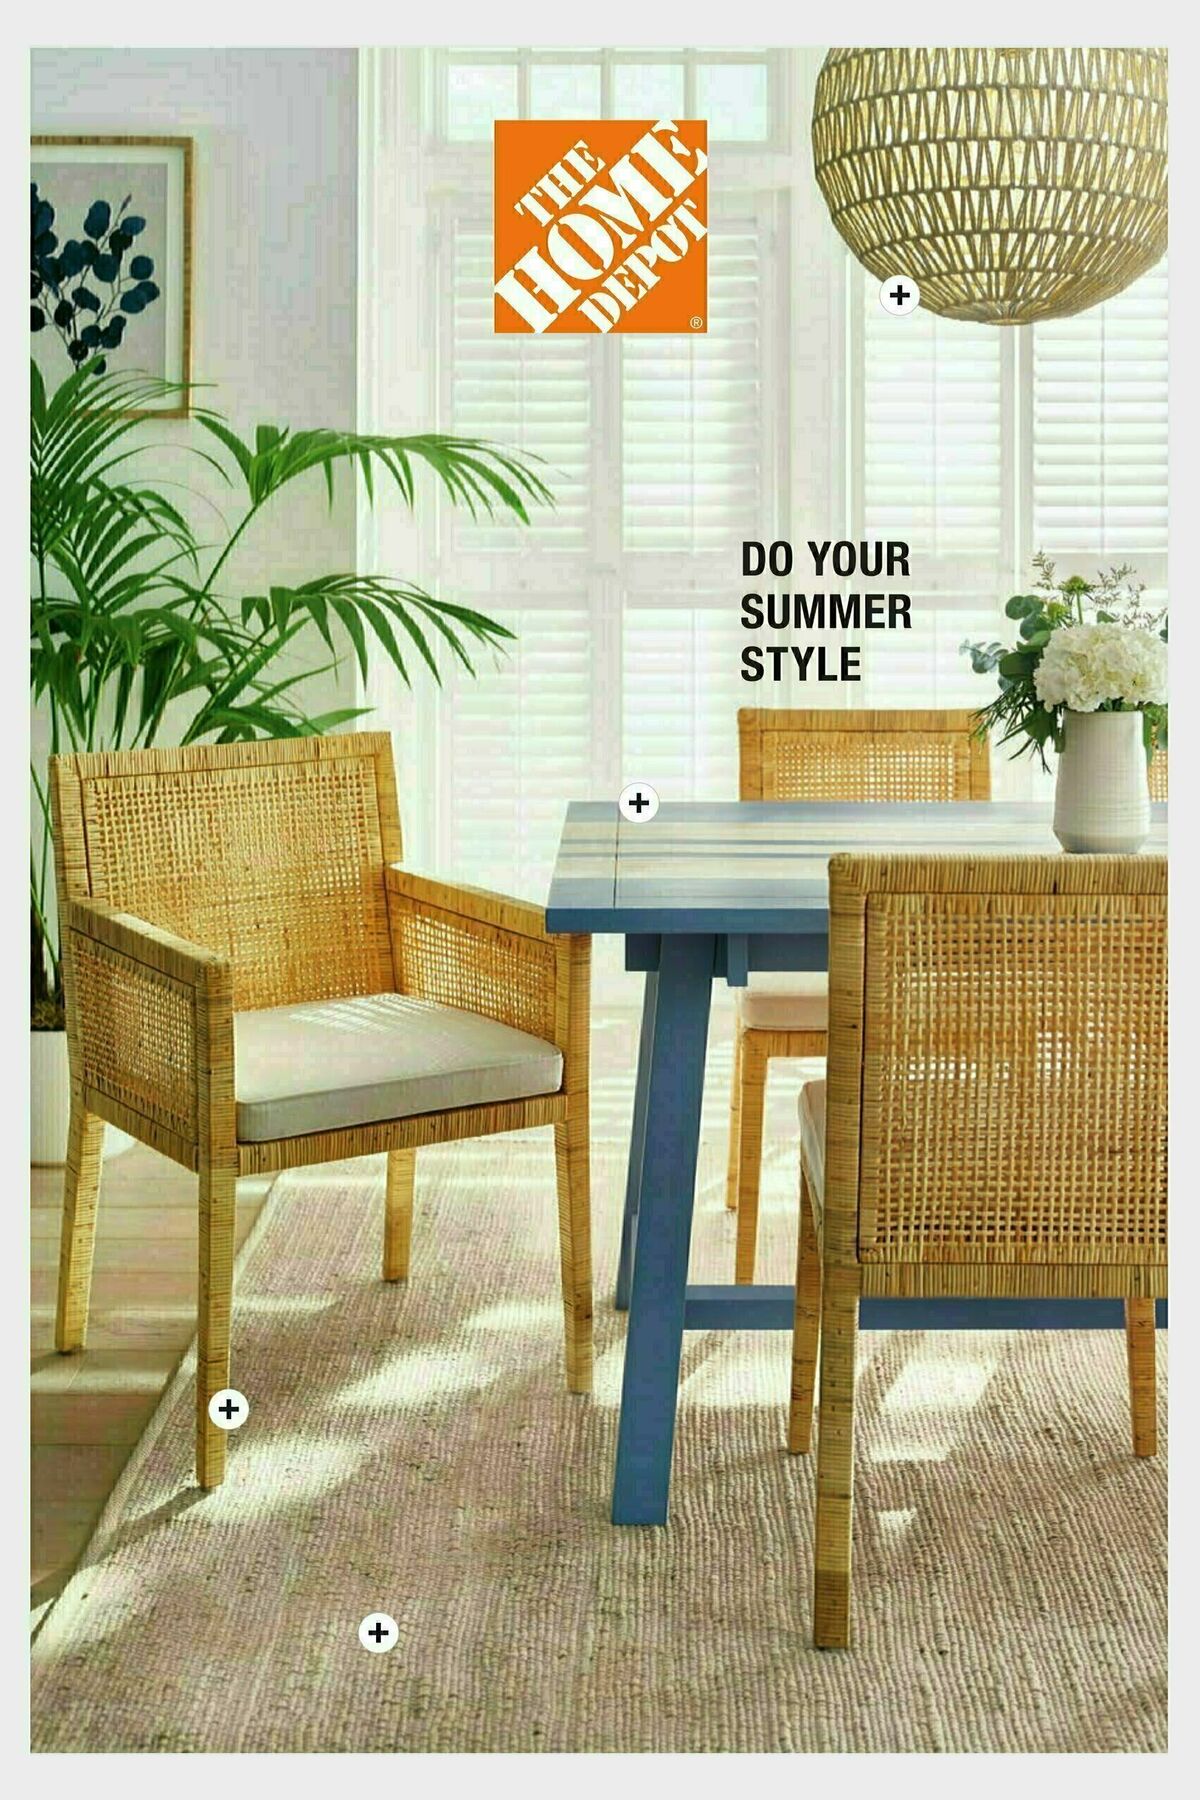 The Home Depot Home Decor Catalog - Late Summer Weekly Ad from June 12